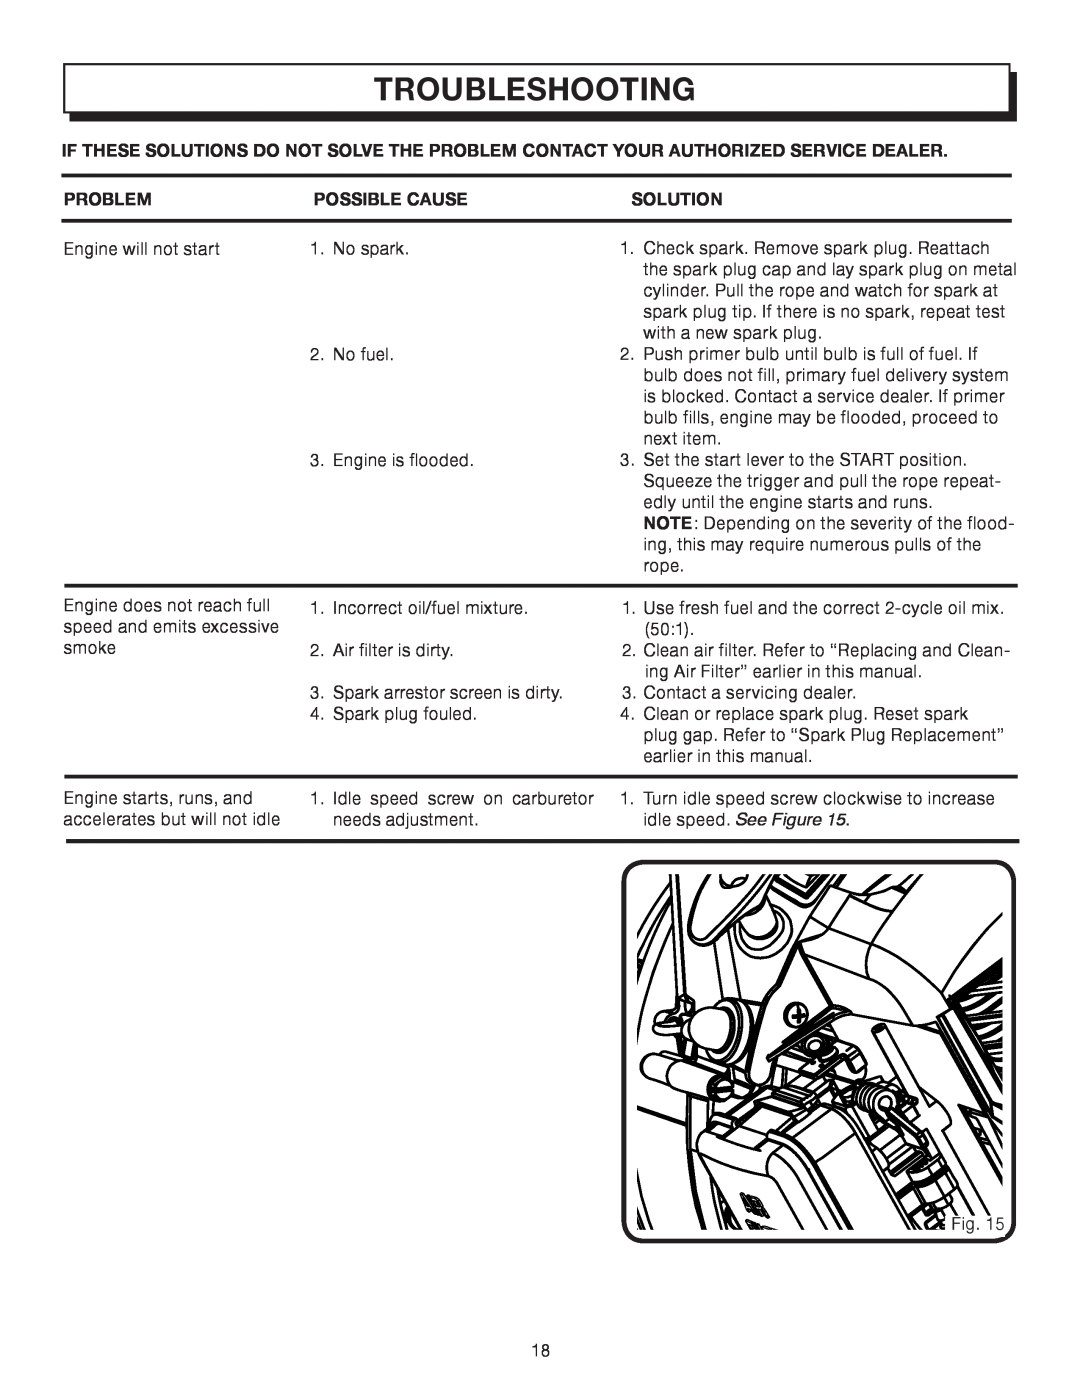 Homelite UT08542A manual Troubleshooting, Problem, Possible Cause, Solution 